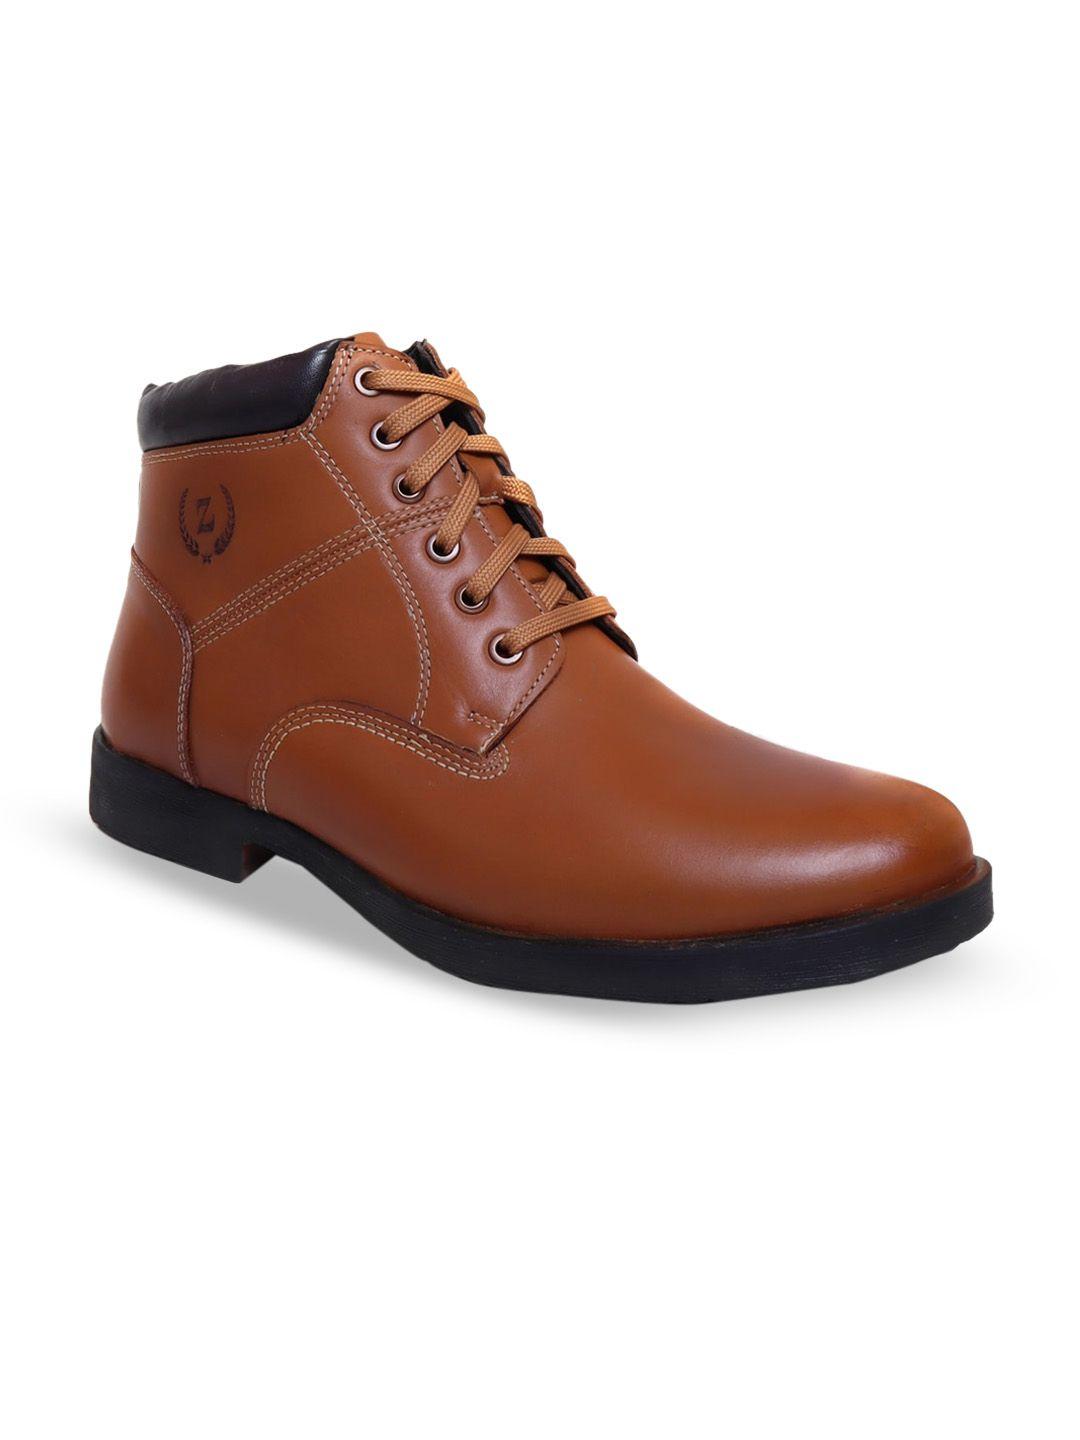 zoom shoes men mid-top leather regular boots